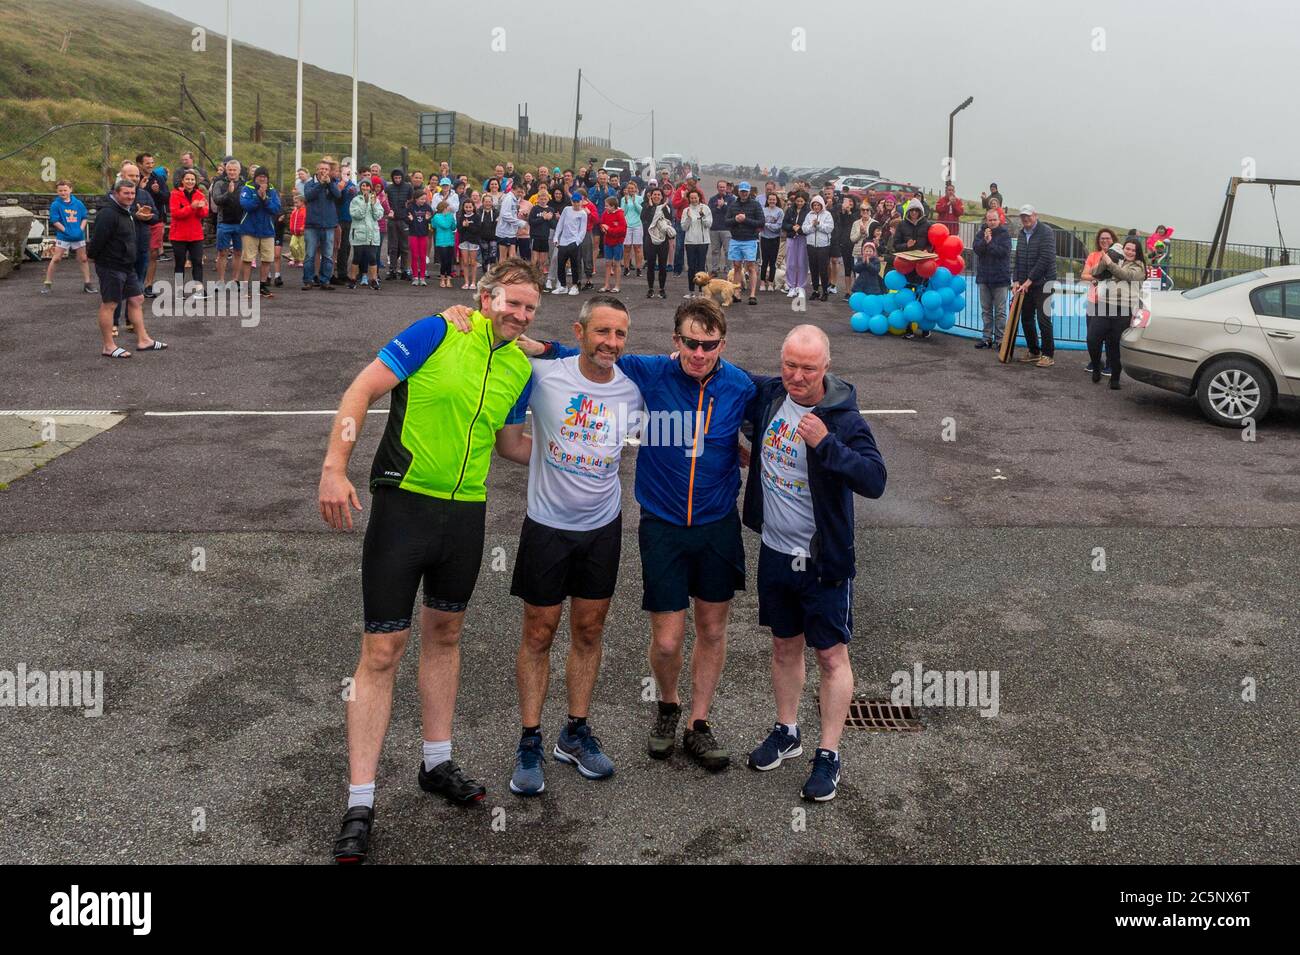 West Cork, Ireland. 4th July, 2020. Barry Sheehan, who lives in Cork, has ran 600 kms from Malin to Mizen Head in aid of the new children's unit 'Cappagh Kids' of National Orthopaedic Hospital, Cappagh, Dublin. Barry is pictured with his support crew after crossing the finish line. Credit: AG News/Alamy Live News Stock Photo